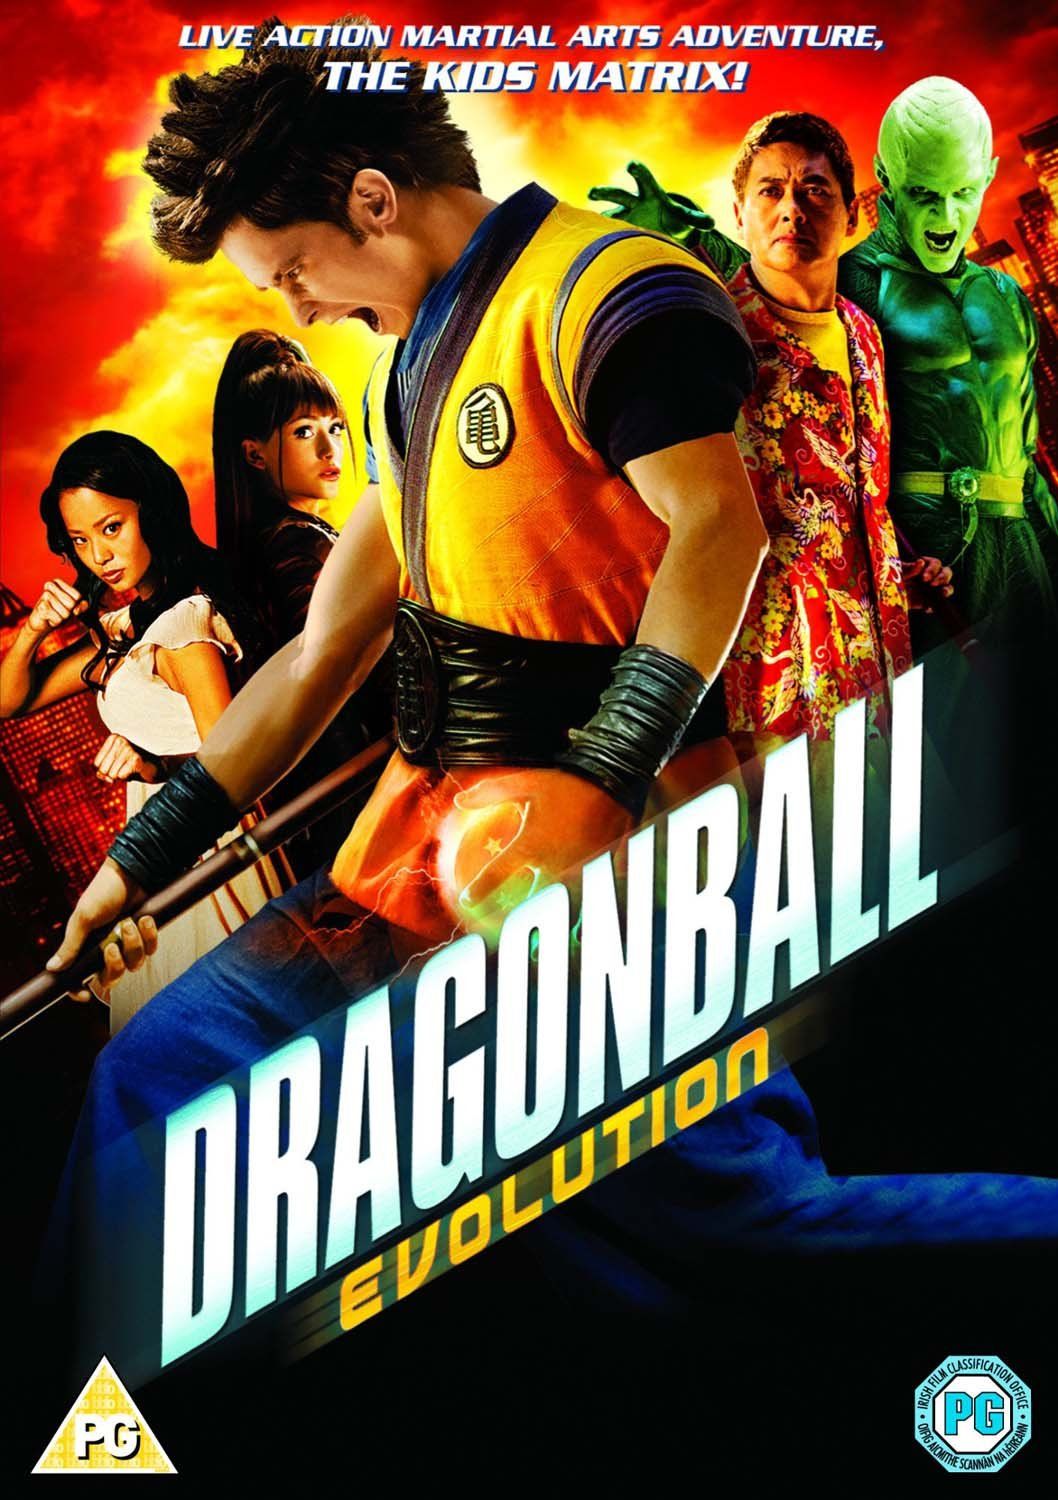 Dragonball Evolution - Wallpaper with Justin Chatwin